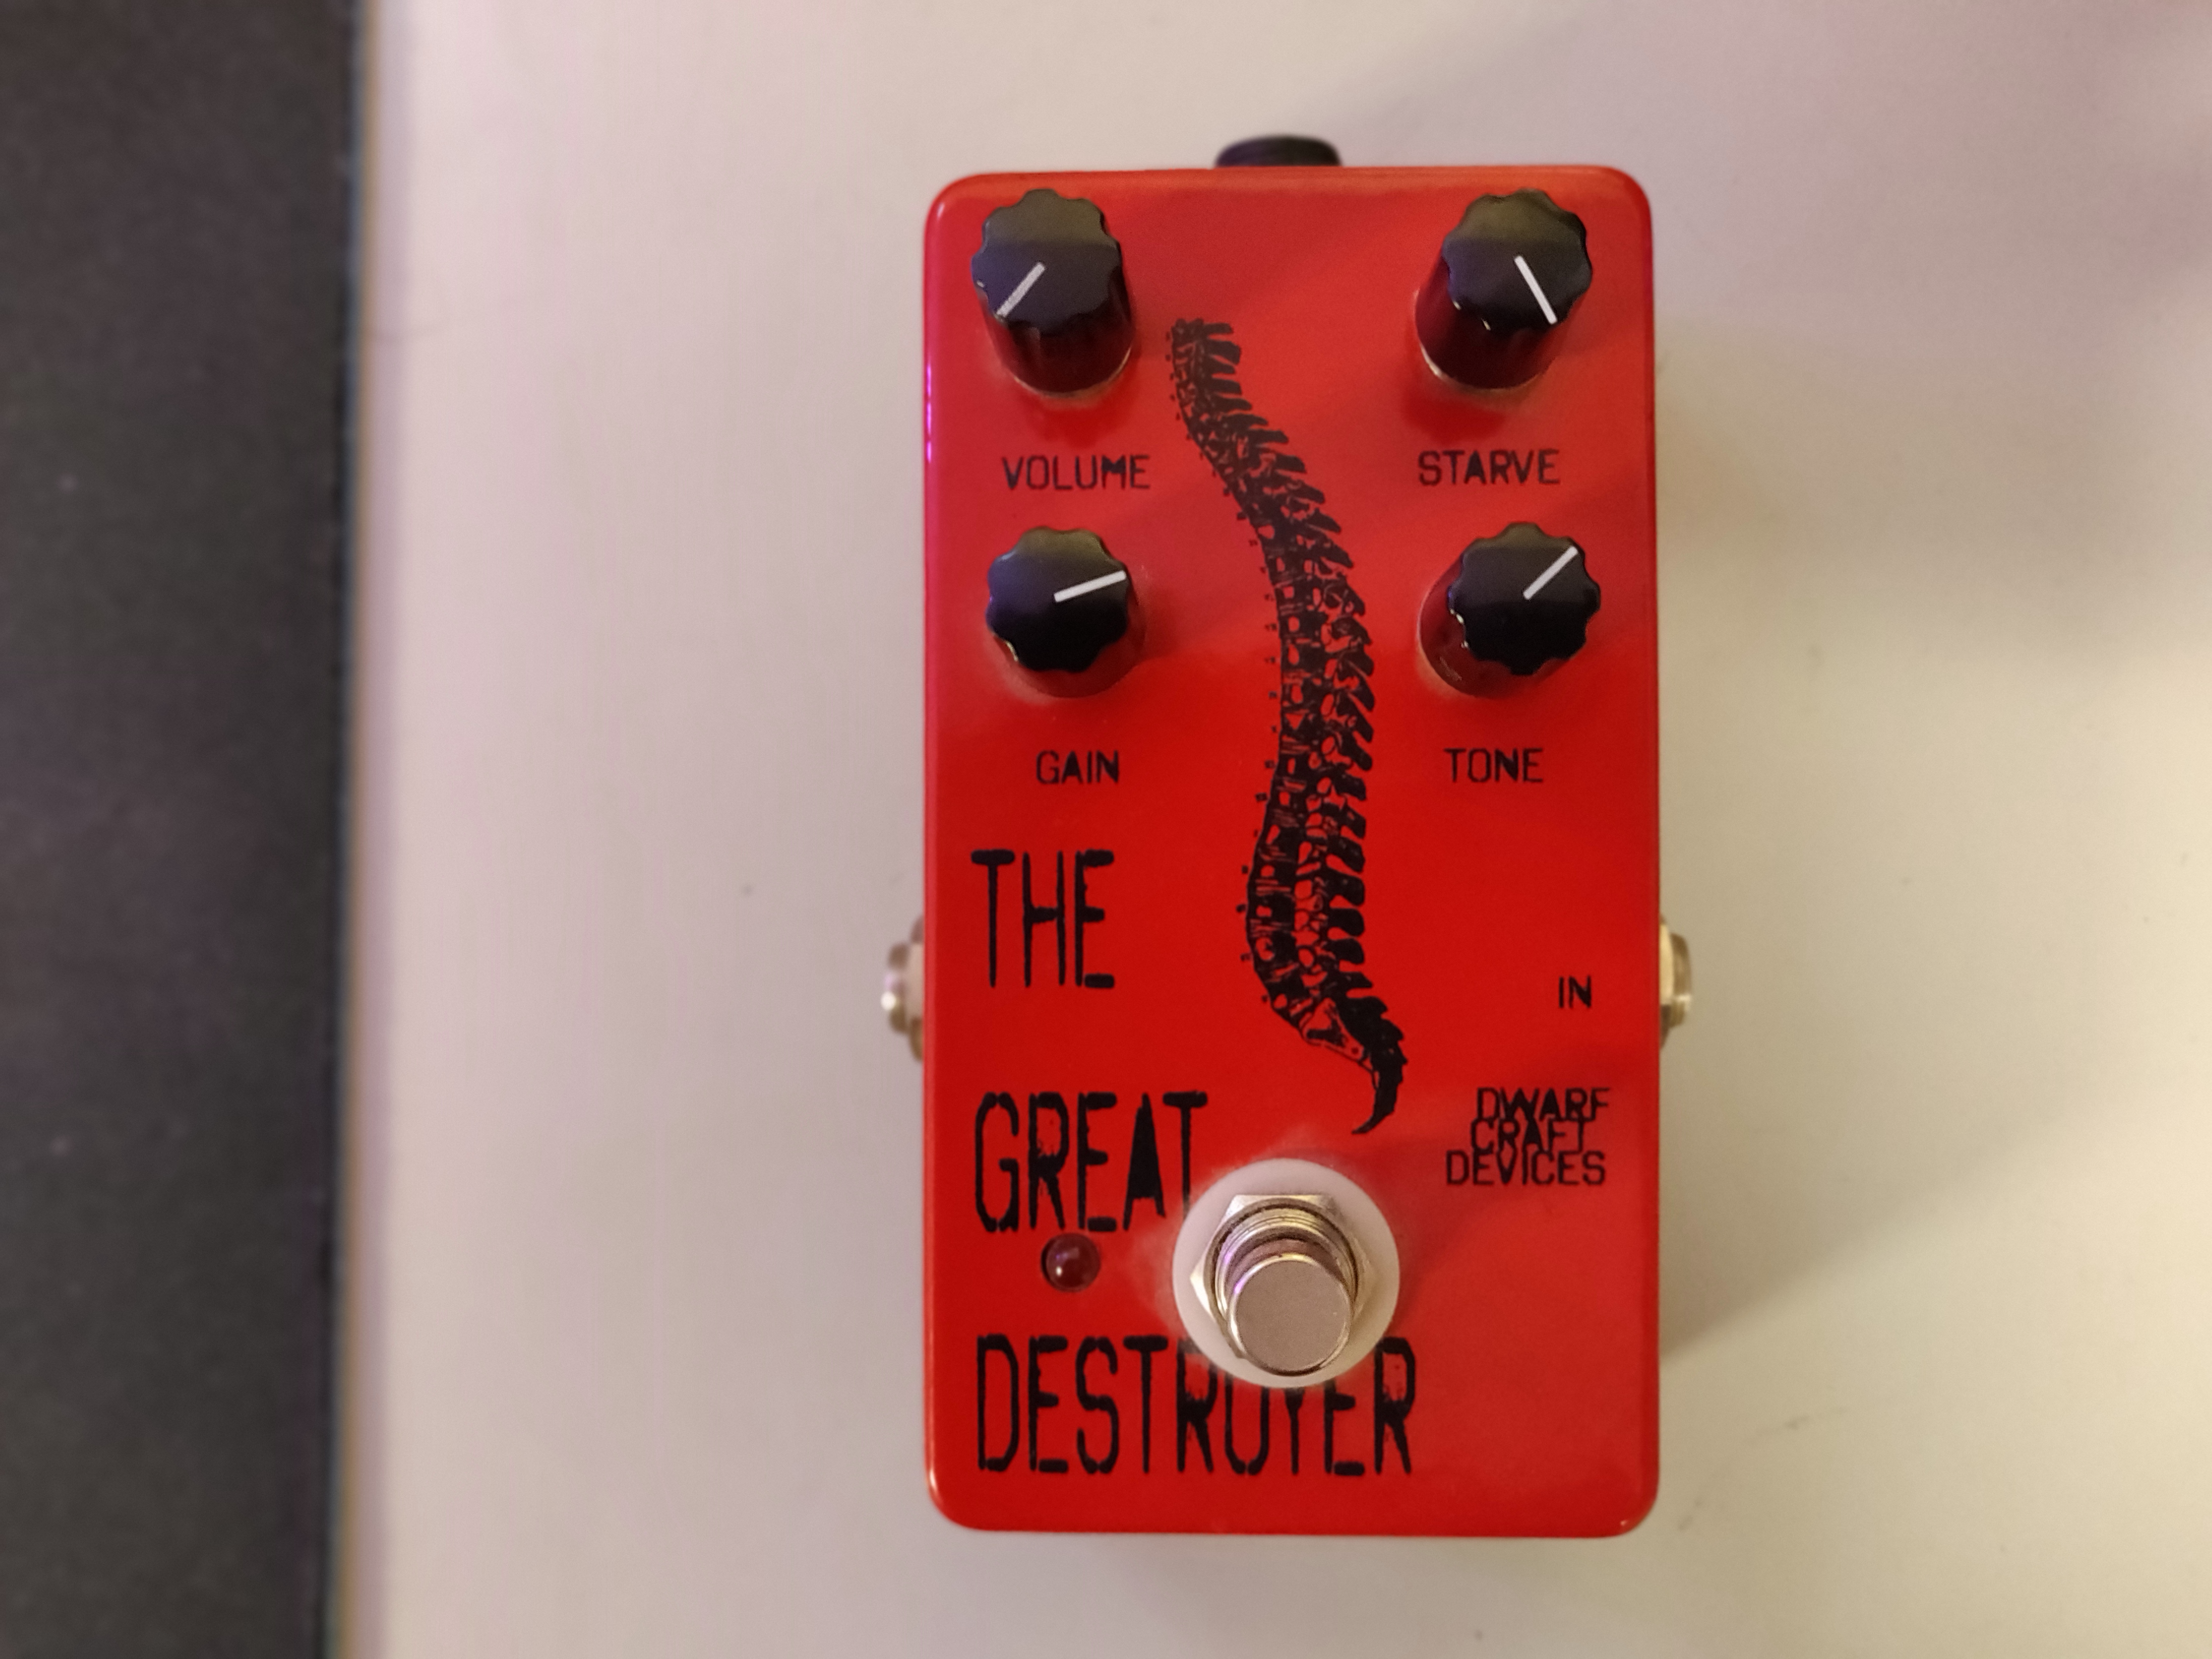 Videos, images, audio files, manuals for Dwarfcraft Devices Fuzz